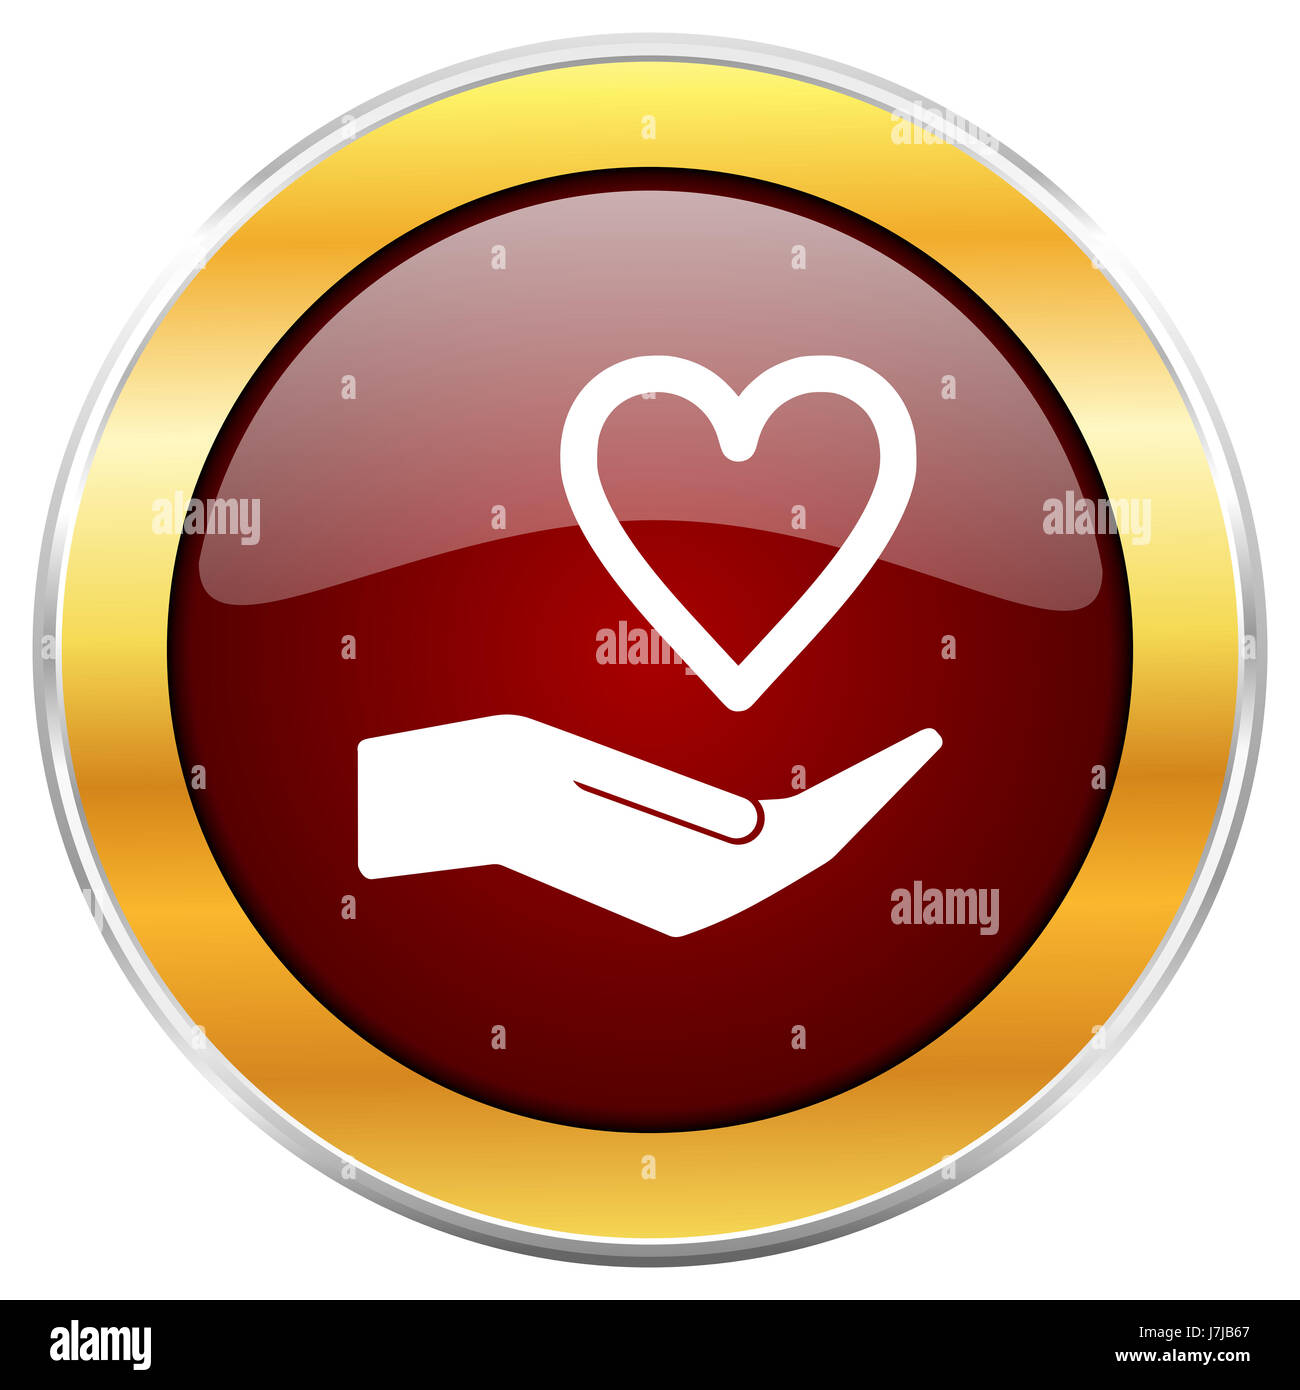 Care love red web icon with golden border isolated on white background. Round glossy button. Stock Photo